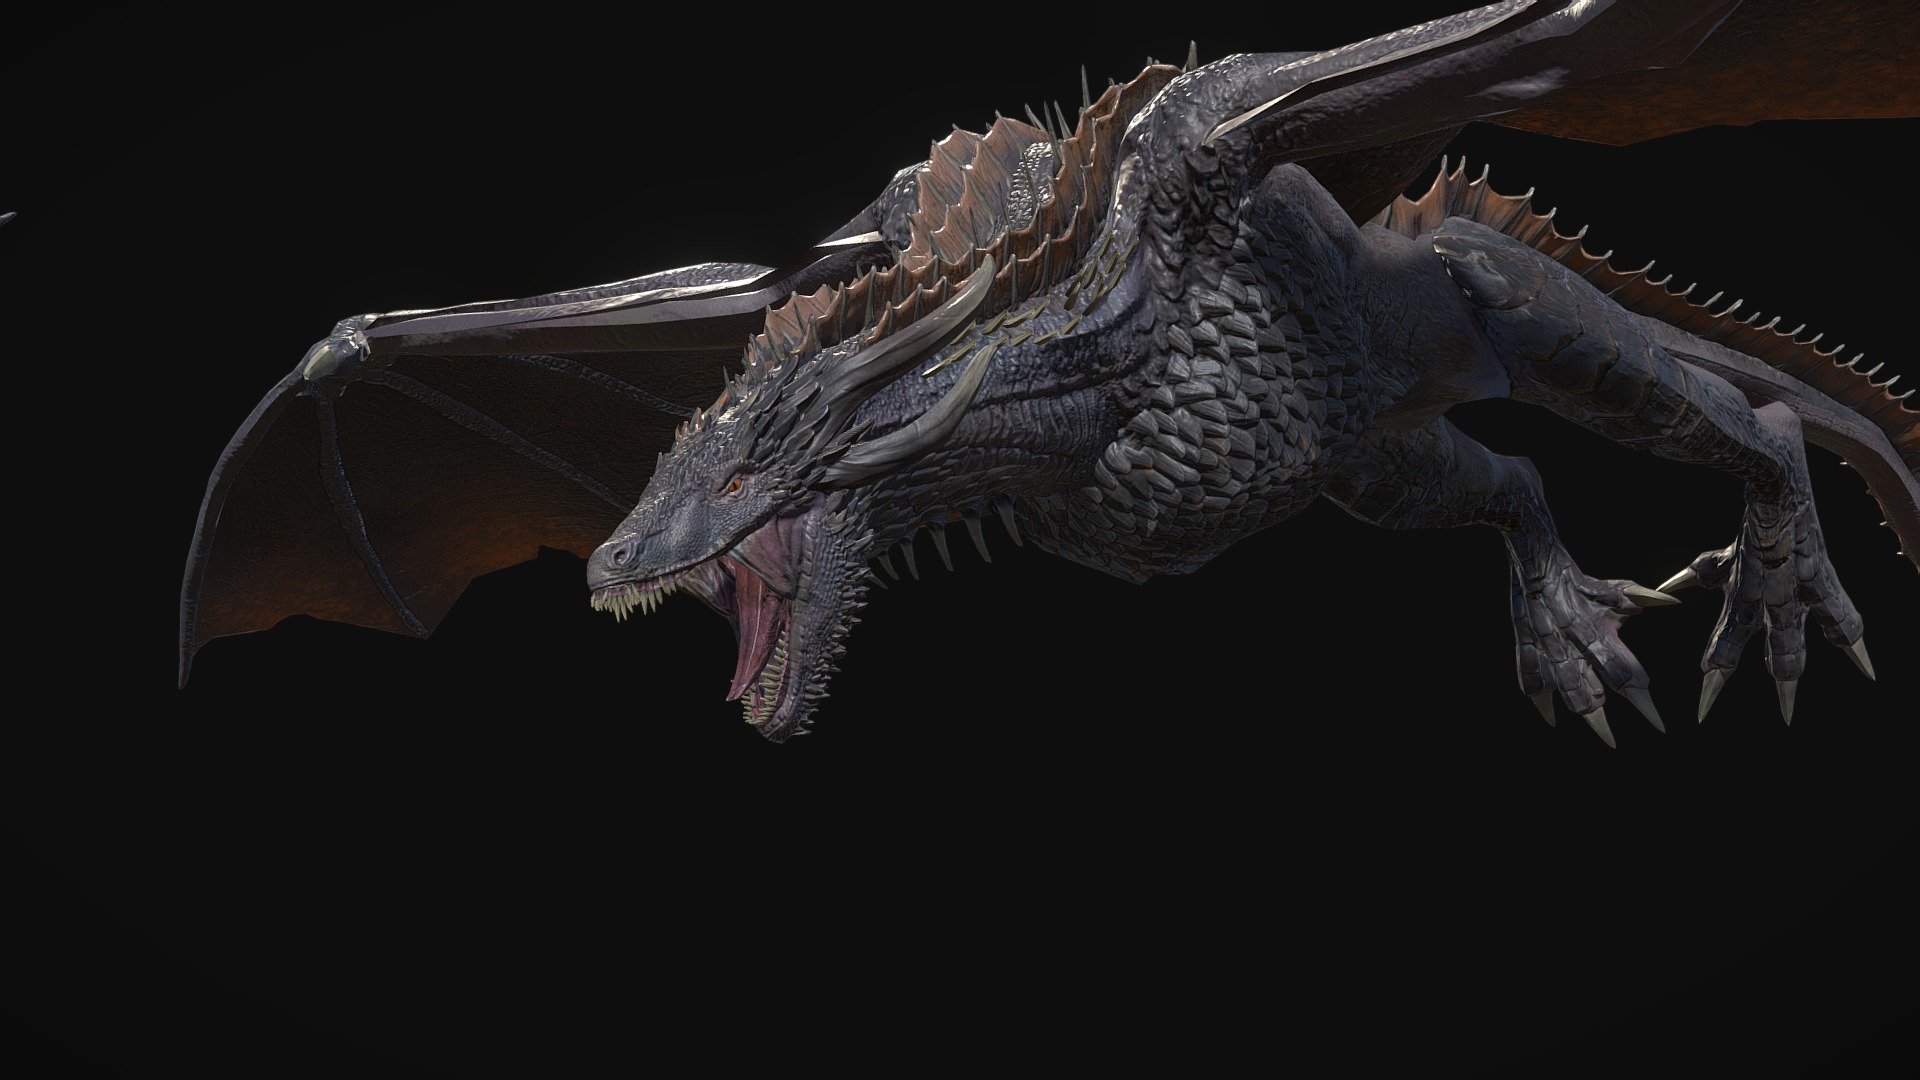 A creature asset I made for a pre-production stretch on a mobile game

Rigged by Erik kruger

Animation and posed by Rayne Lumby https://www.artstation.com/redrain1

Concept support from Raymond Minaar(The man knows a thing or 2 about dragons) https://www.artstation.com/raymondminnaar/albums/all - Drogon Game of Thrones - 3D model by dunx 3d model